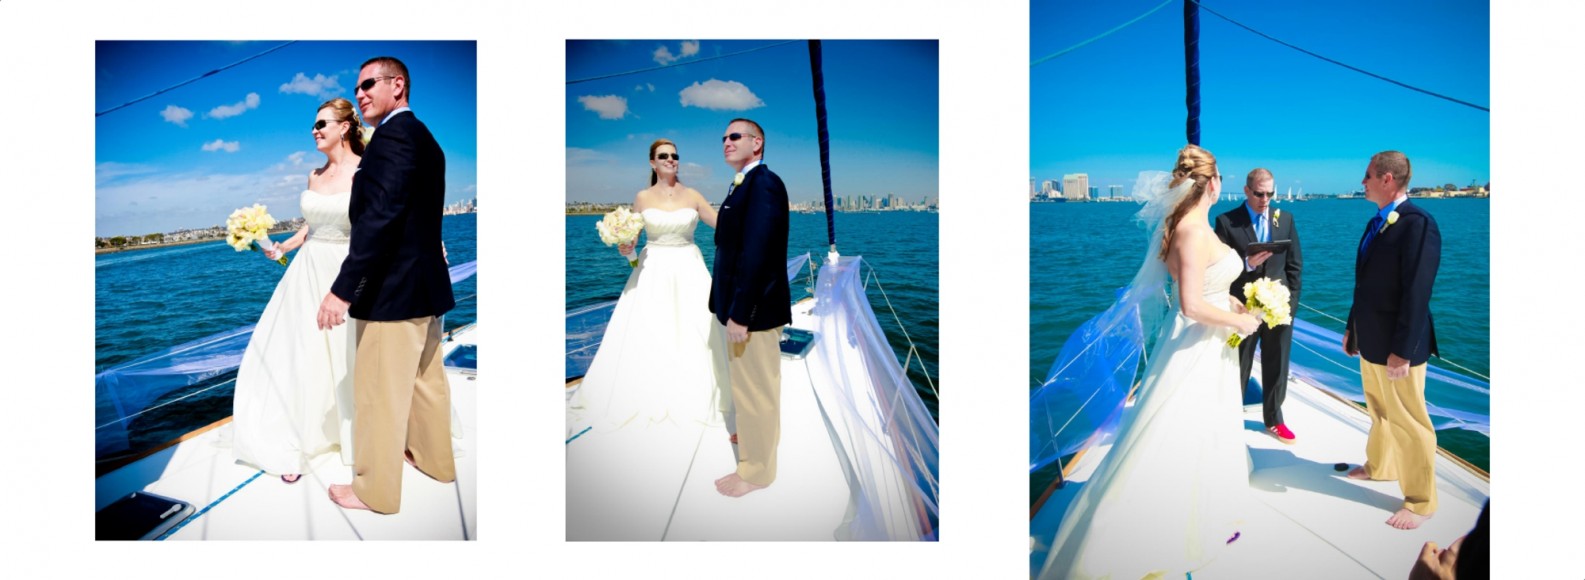 Laura and Davids Wedding Book - San Diego Yacht Wedding by Wedding Photographers Andrew Abouna - Pages 12-13